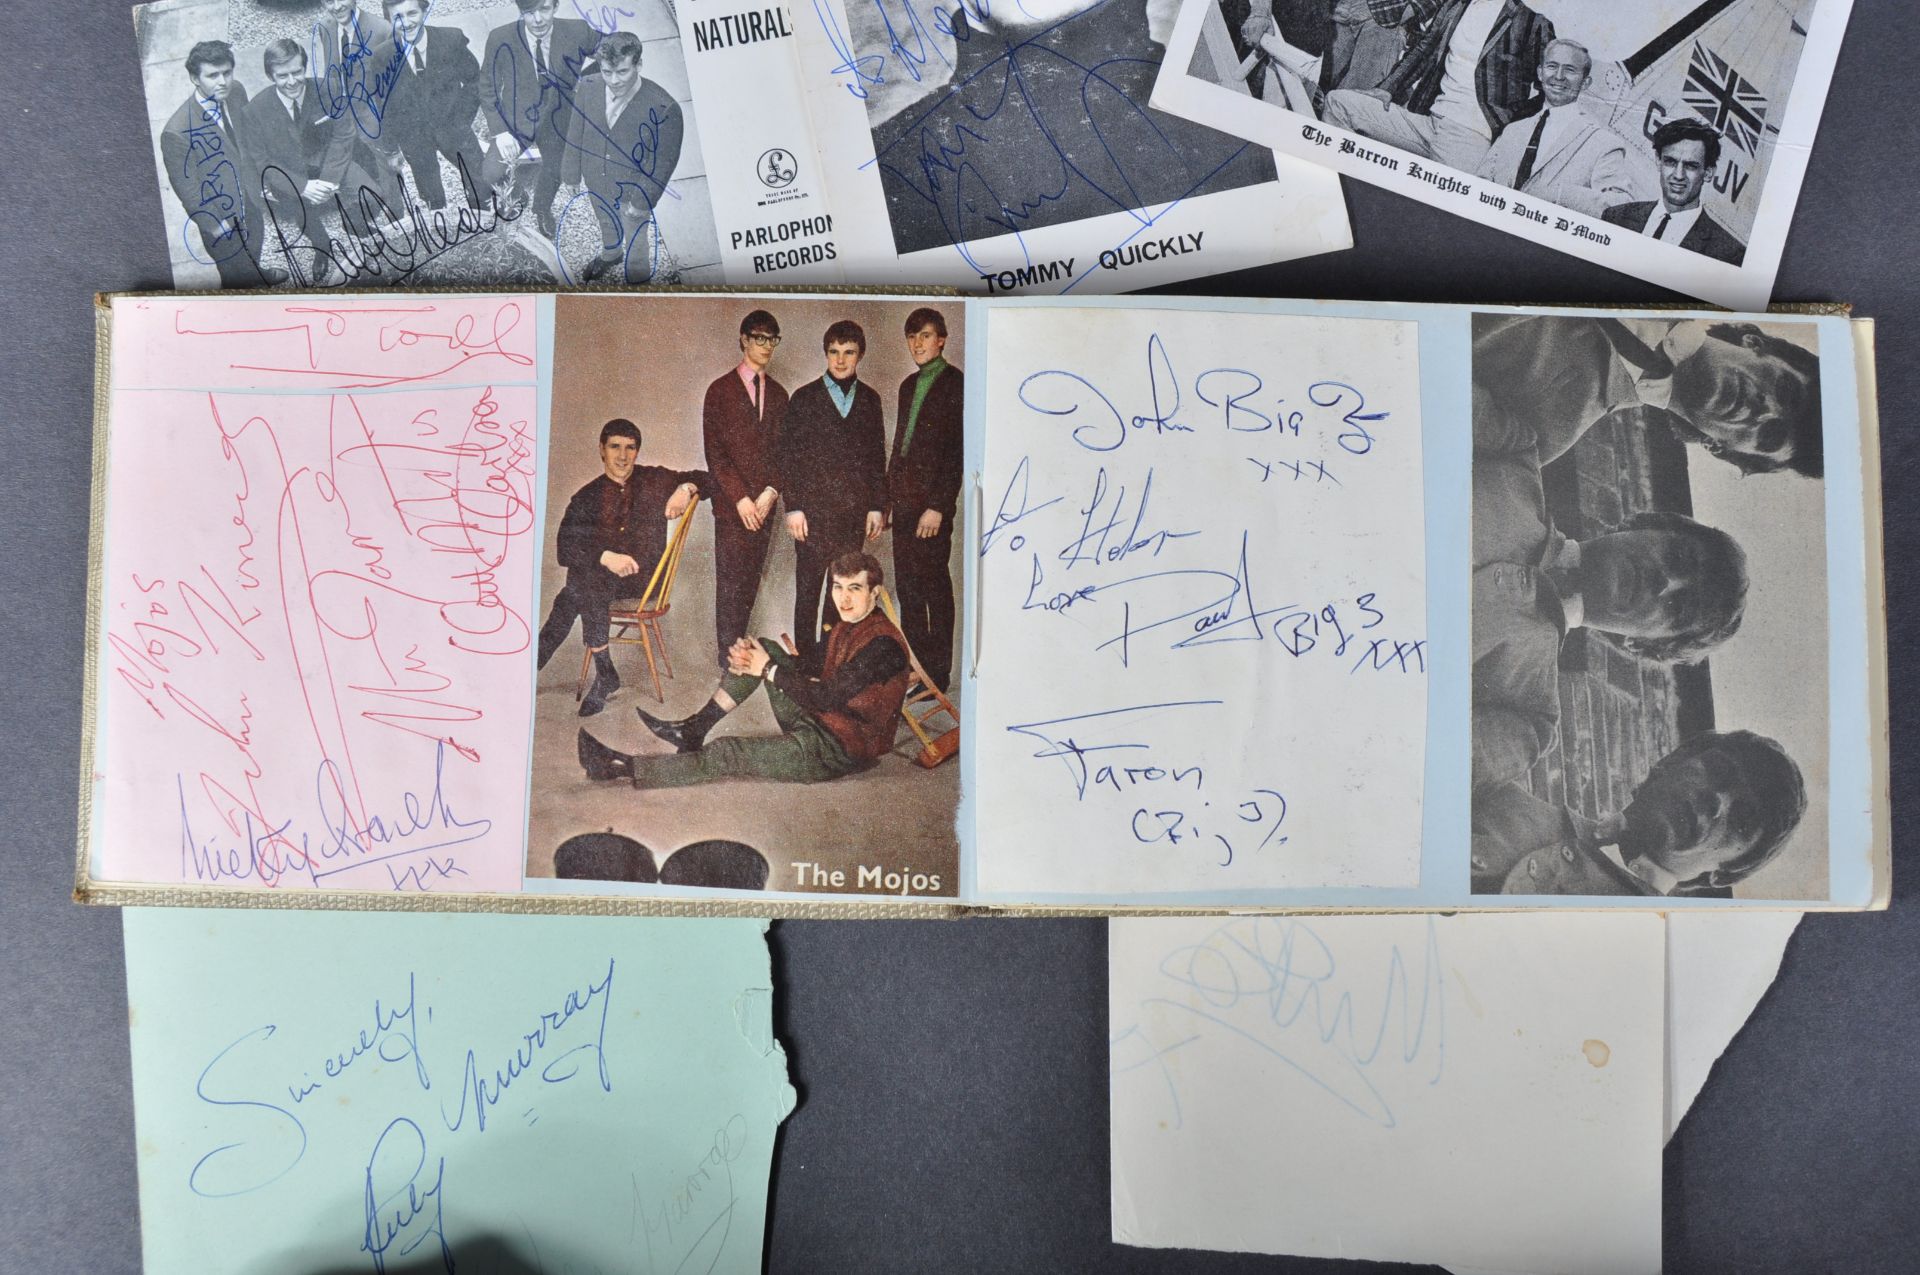 1960S MUSIC AUTOGRAPH ALBUMS - OBTAINED FROM DISCS-A-GOGO - Image 22 of 31